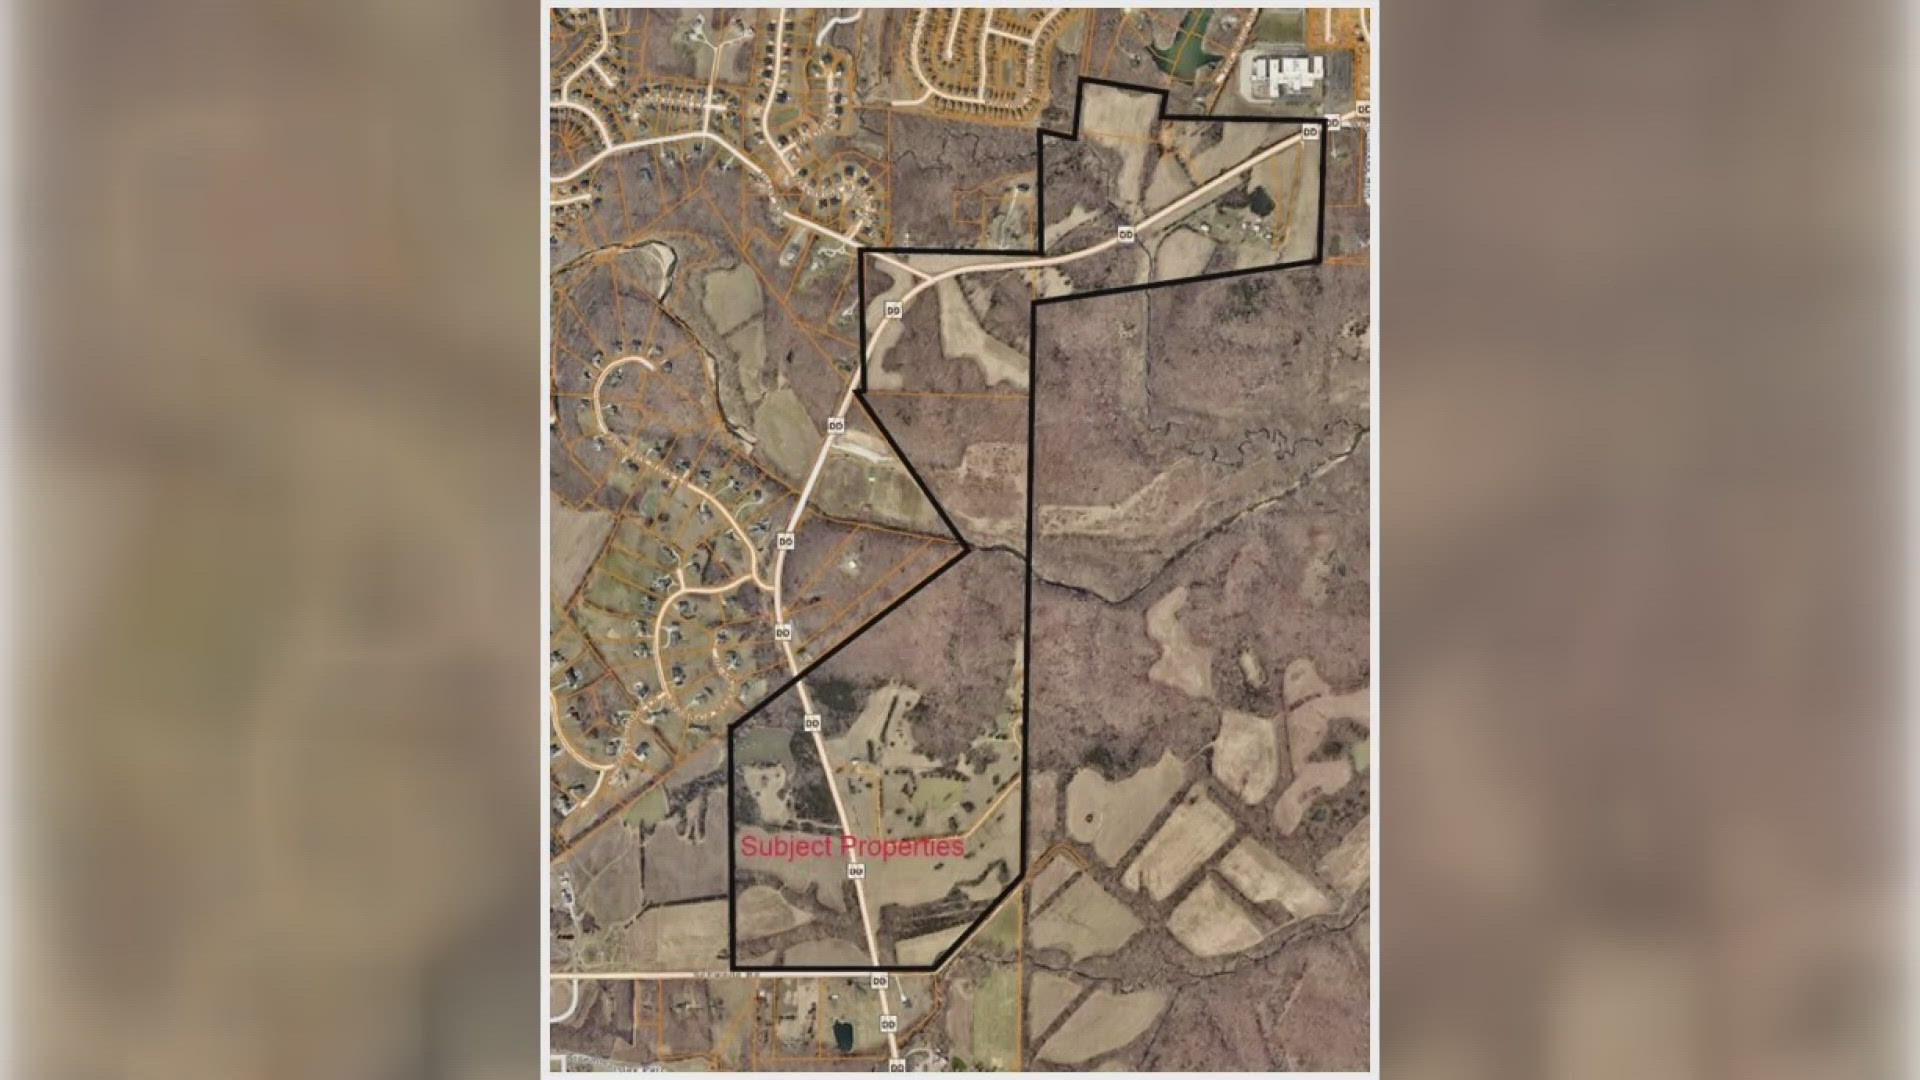 Some residents are concerned about a proposed housing development off Highway DD. The proposal could bring an additional 556 homes to only 356 acres of land.